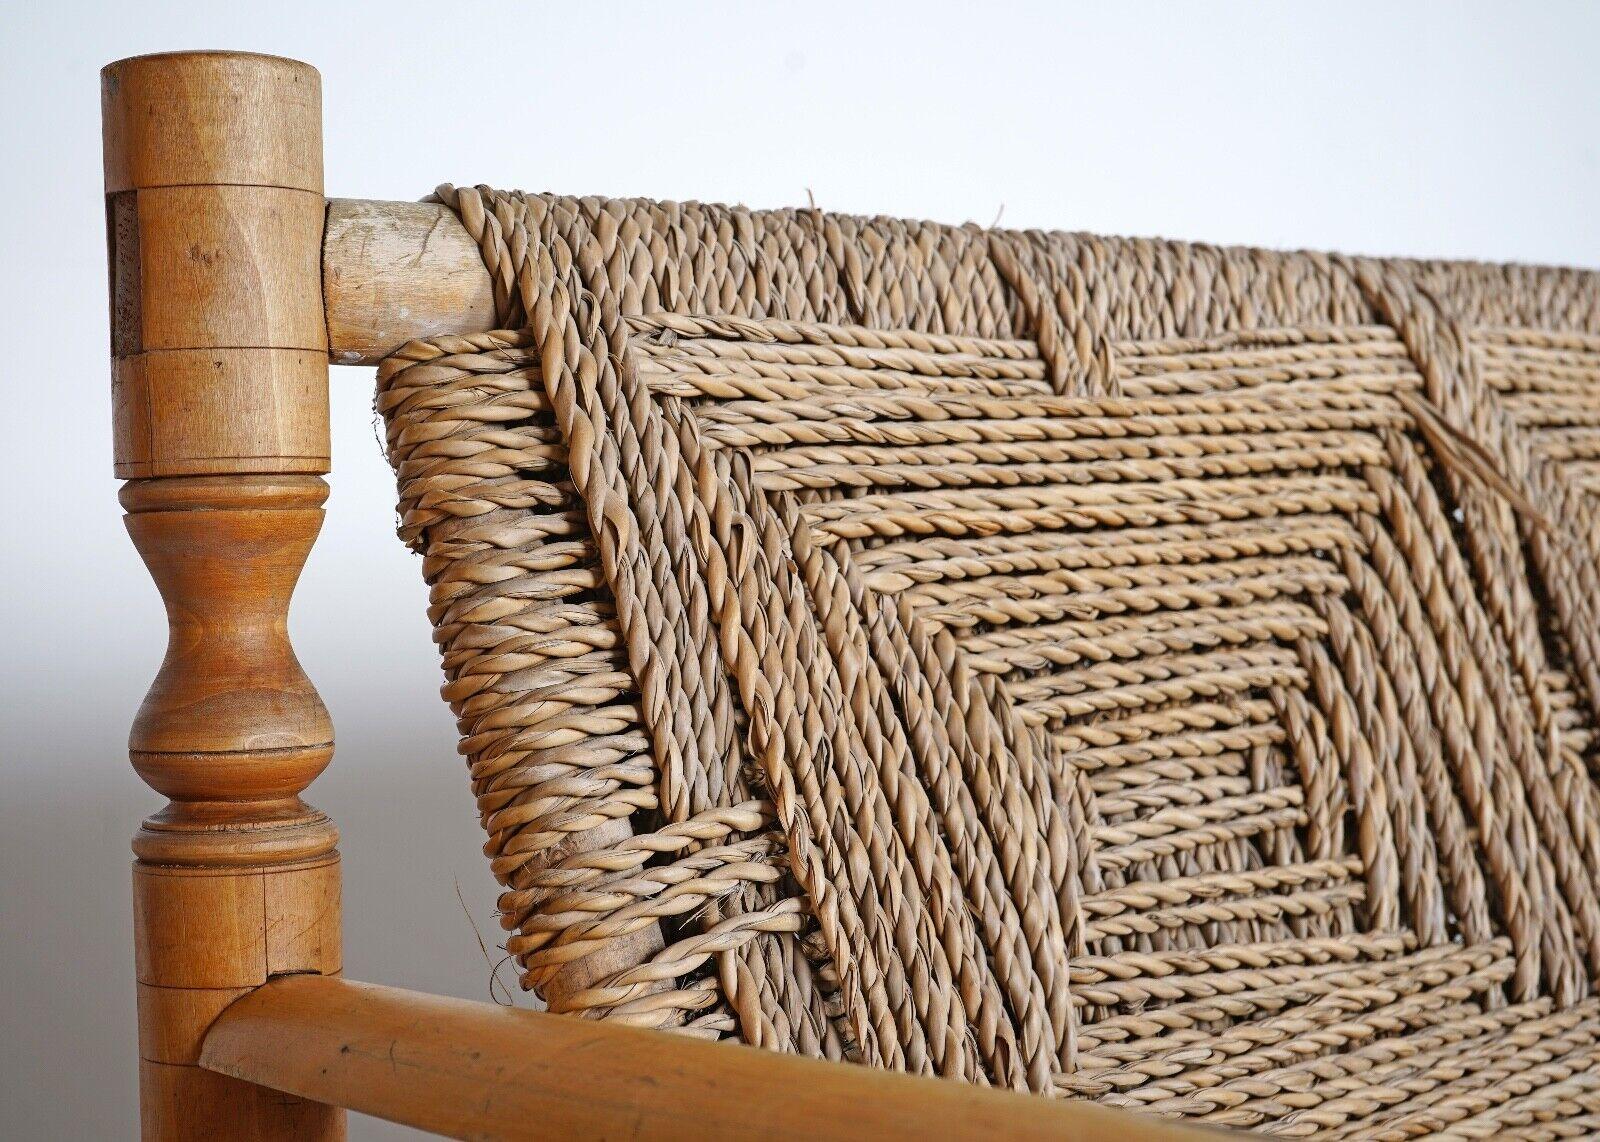 Rush 1950's French Bench by Adrien Audoux and Frida Minnet - Hemp Rope Seat 